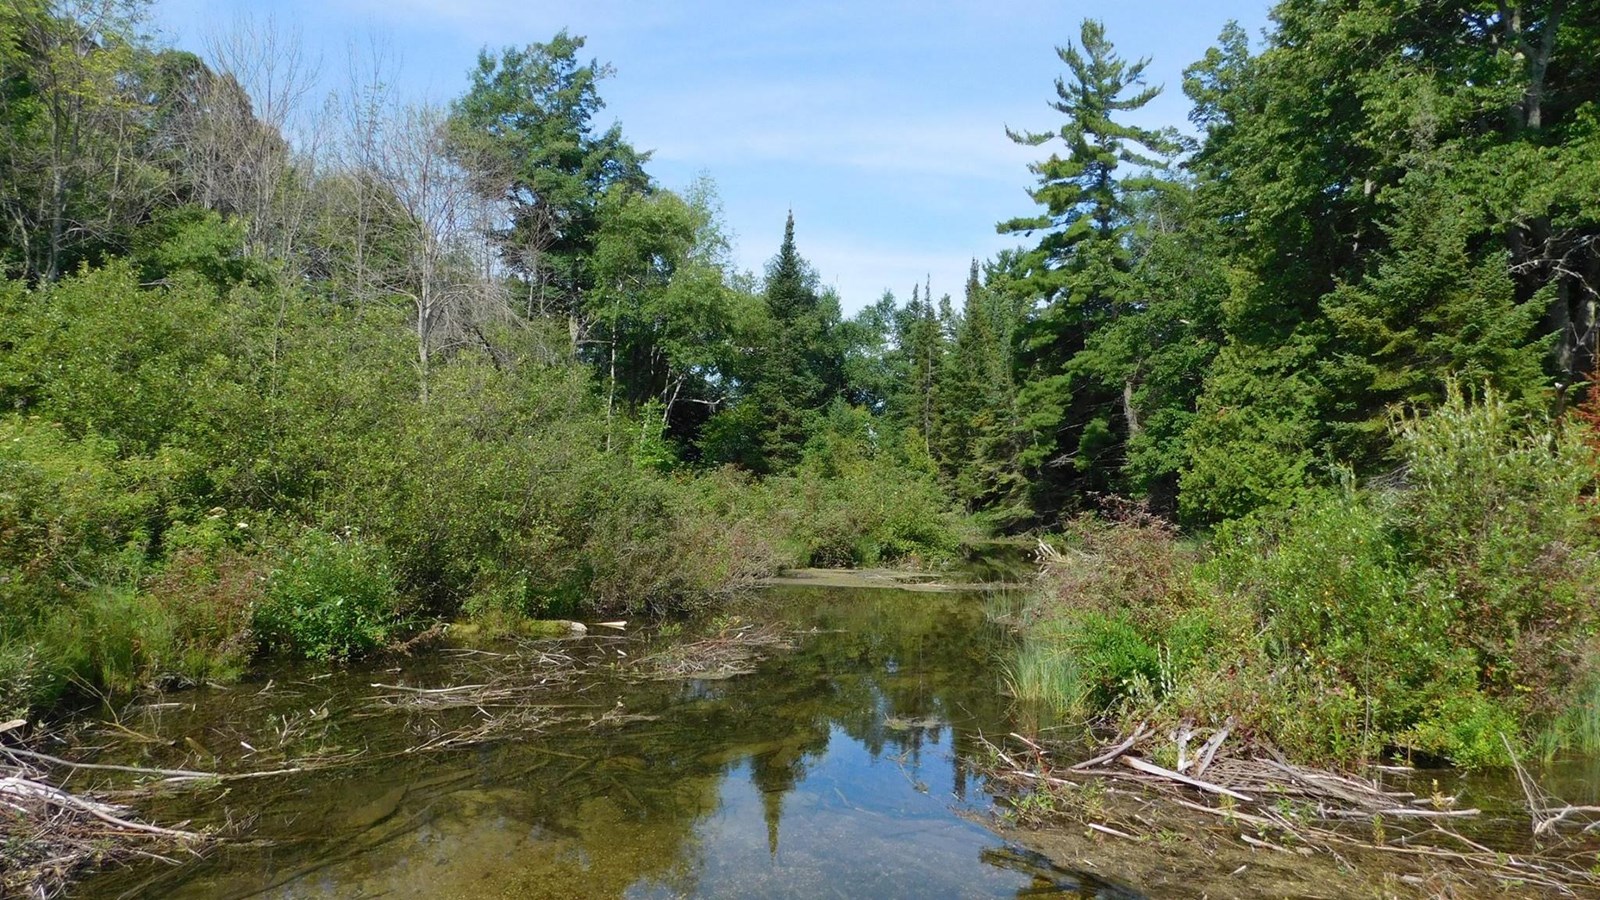 A clear shallow creek runs between green shrubs and trees, with a blue sky in the background.